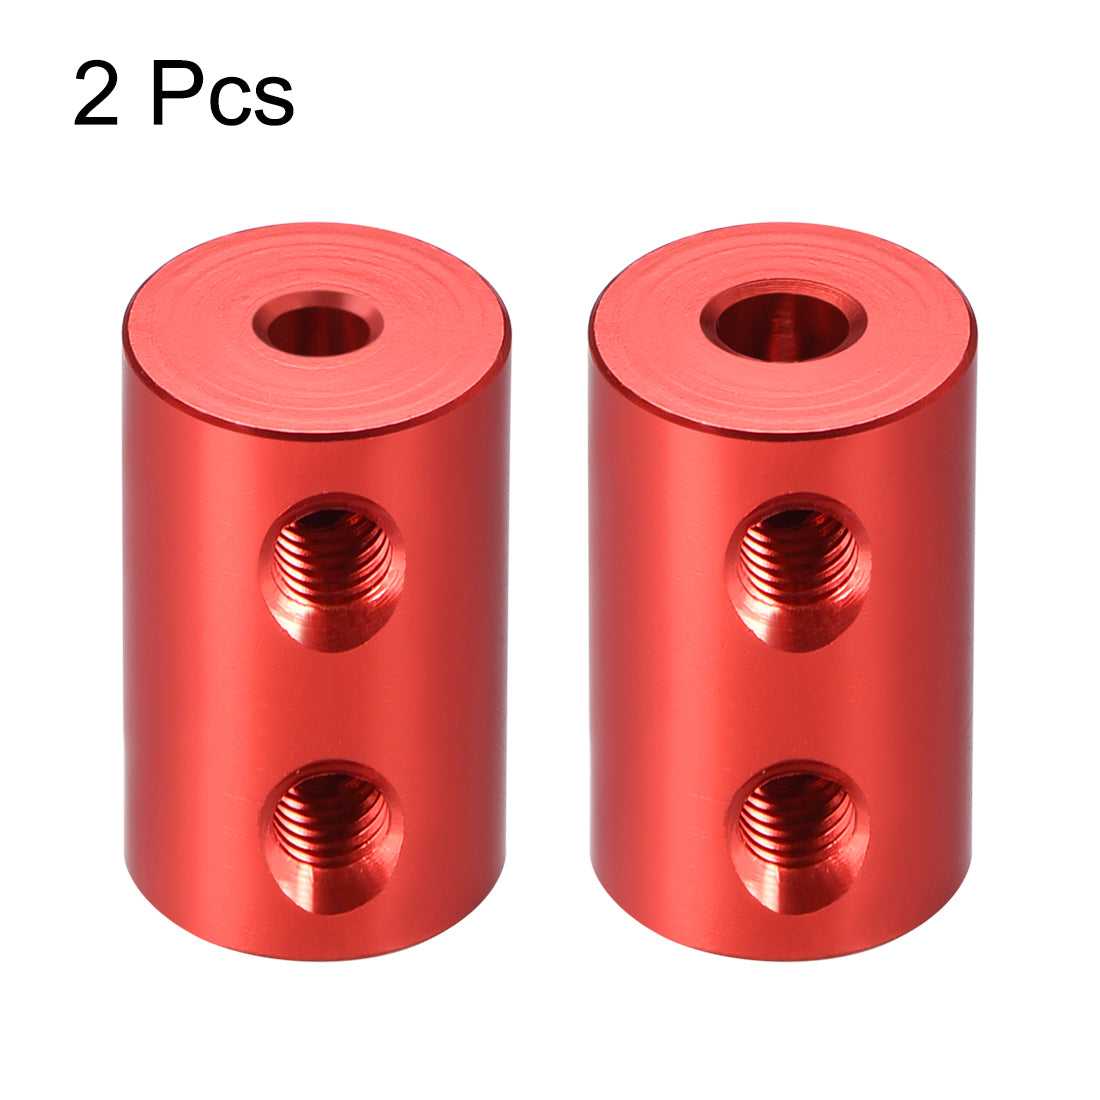 uxcell Uxcell Shaft Coupling 3mm to 4mm Bore L20xD12 Robot Motor Wheel Rigid Coupler Connector Red 2 Pcs